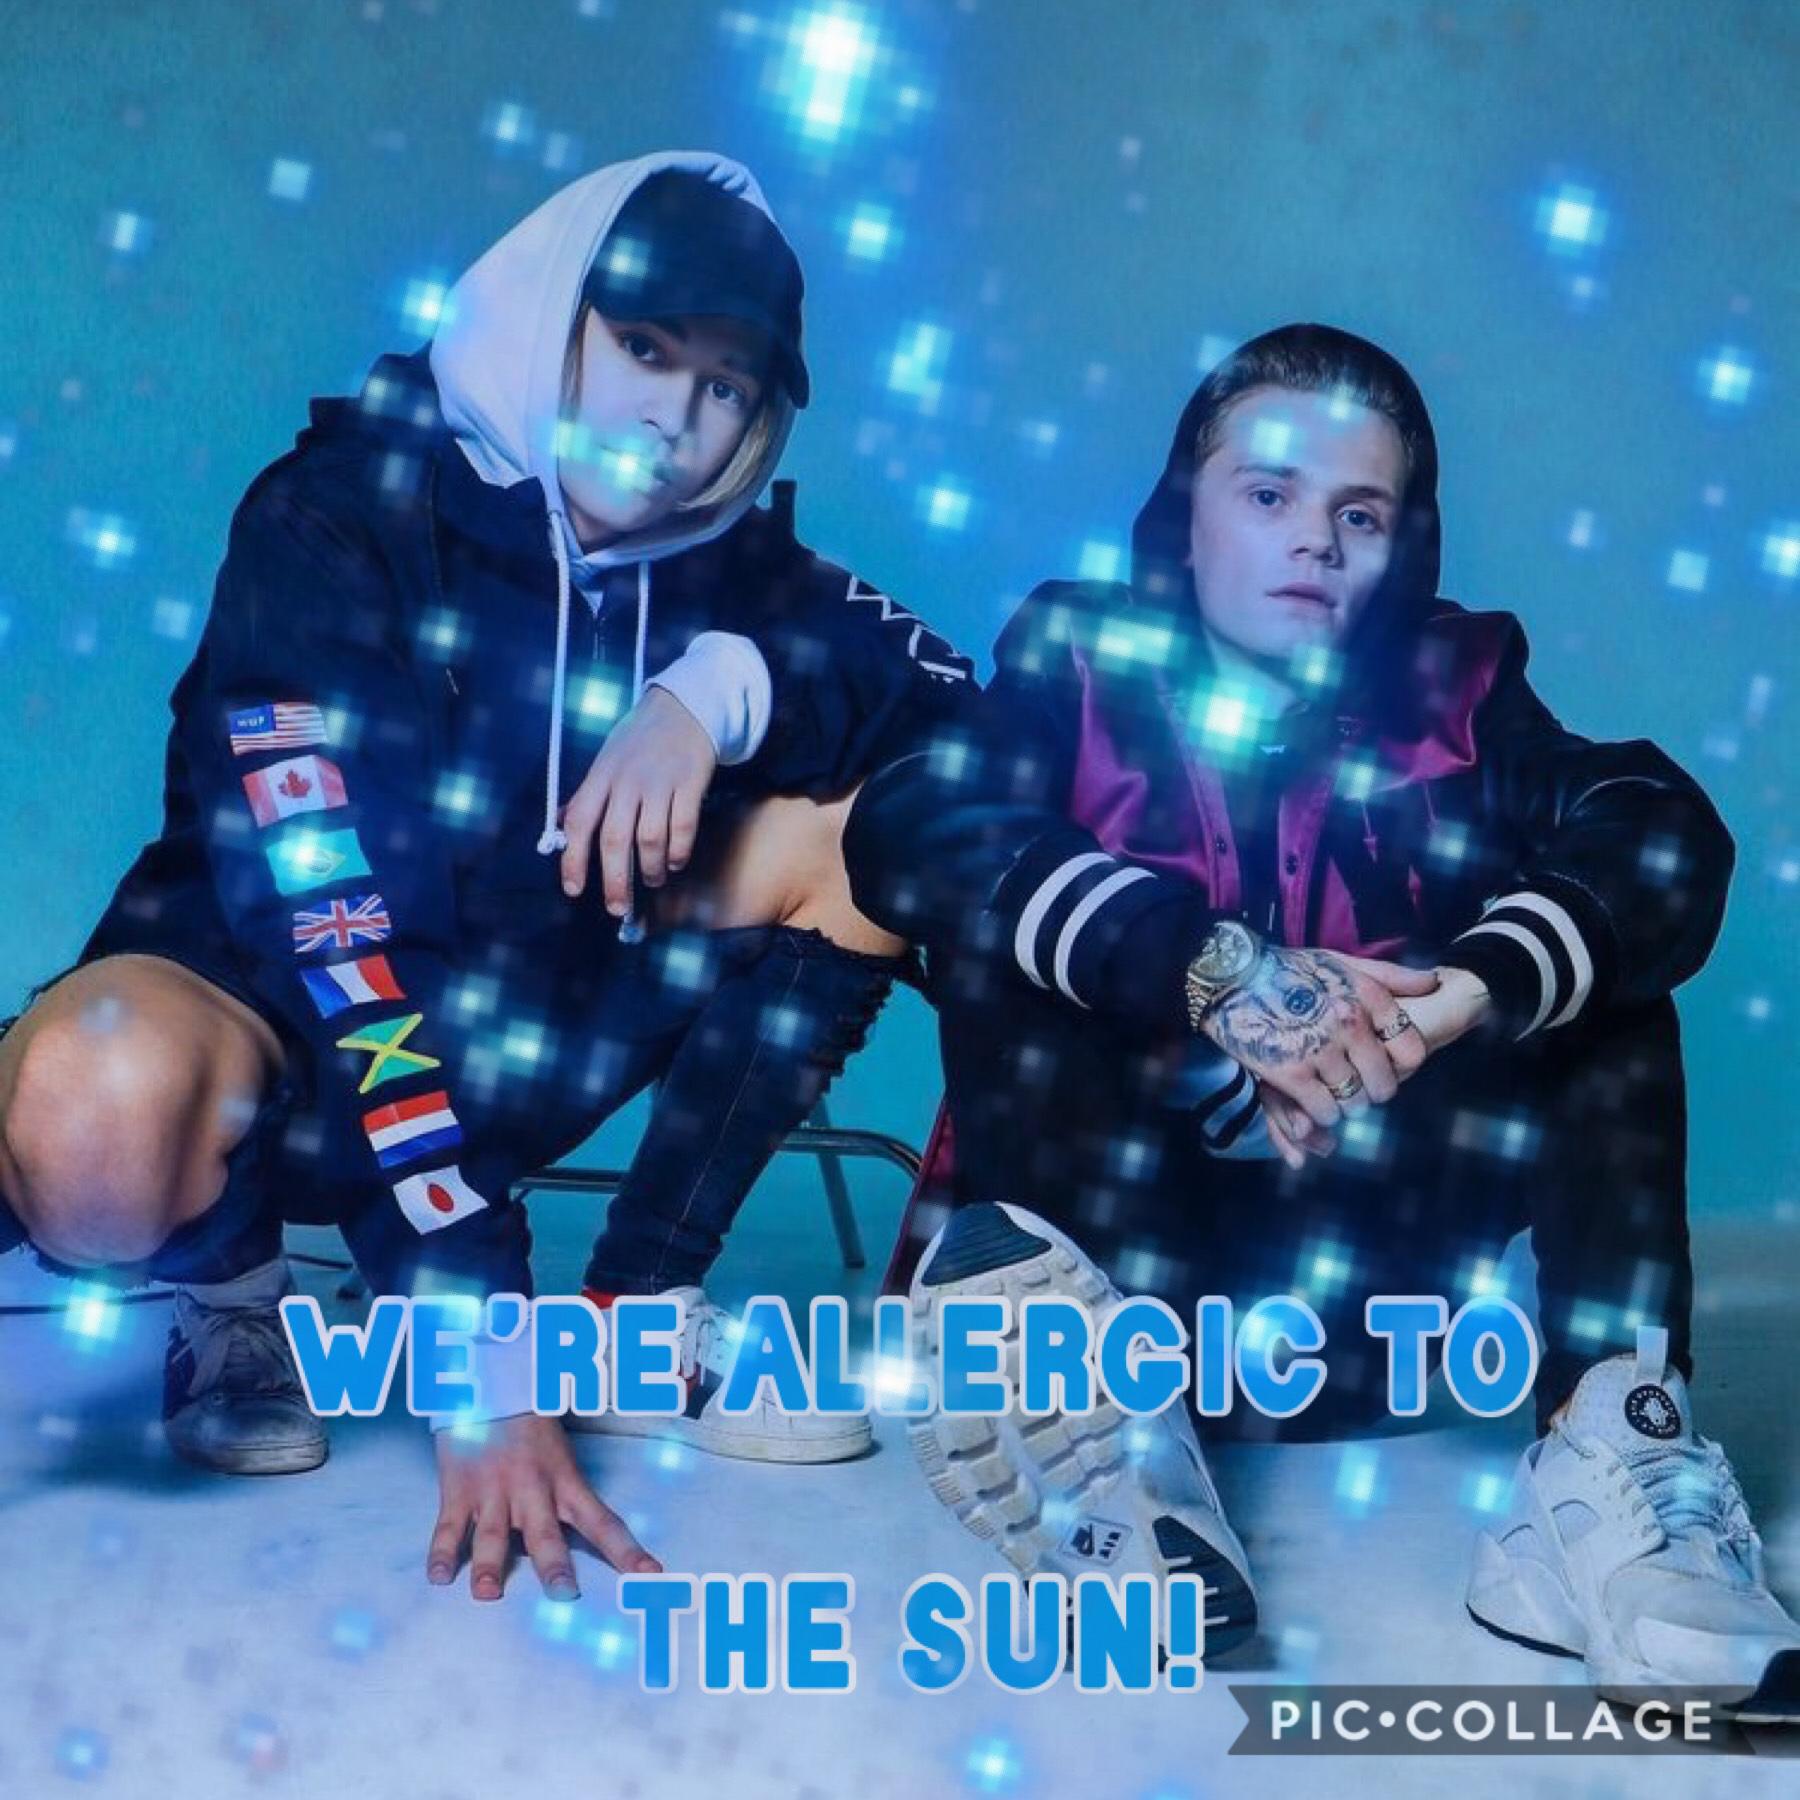 allergic to the sun by bars and melody